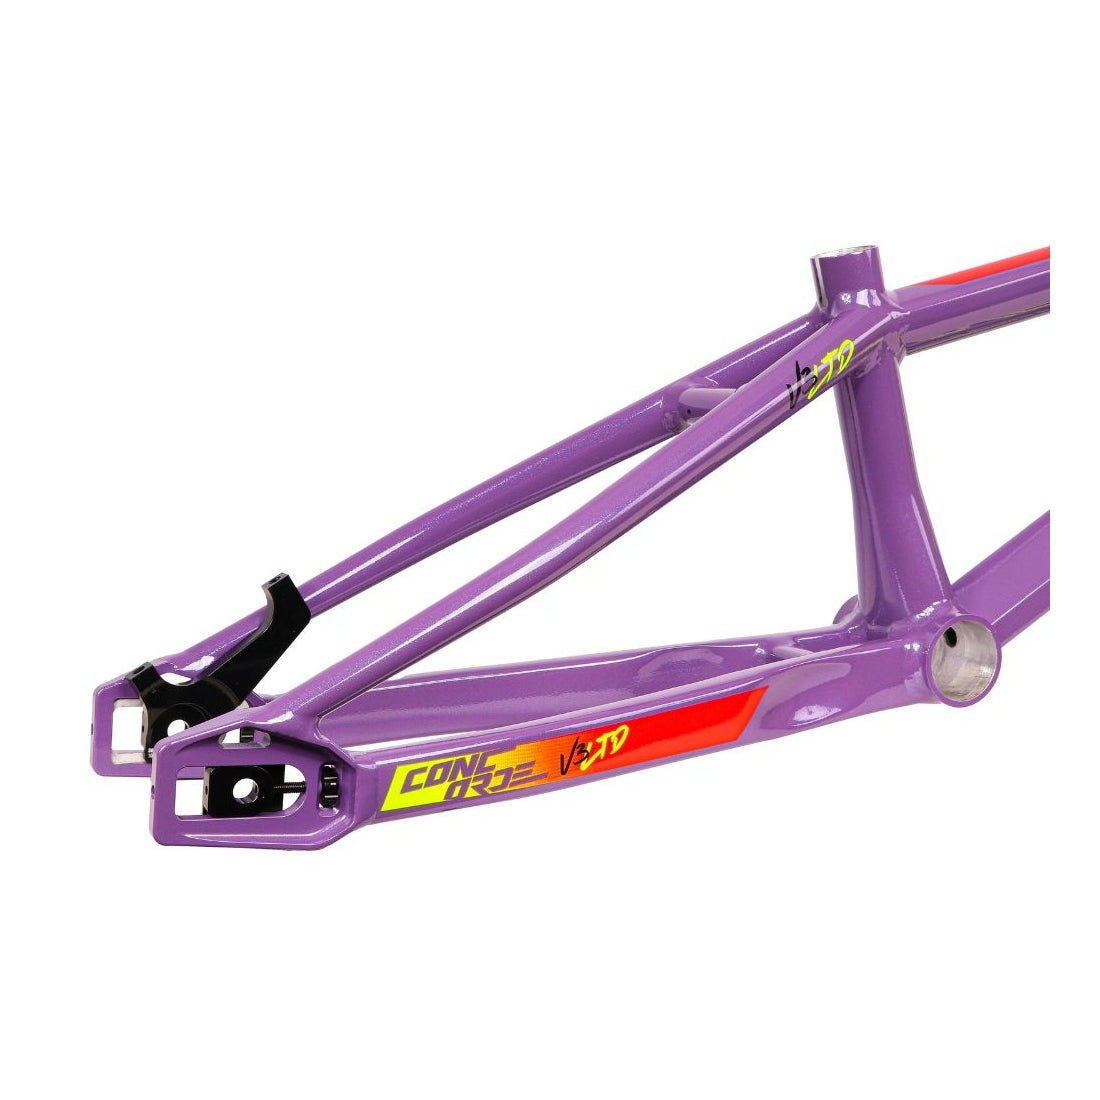 Purple Inspyre Concorde V3 Expert BMX Race bicycle frame with orange and yellow decals.